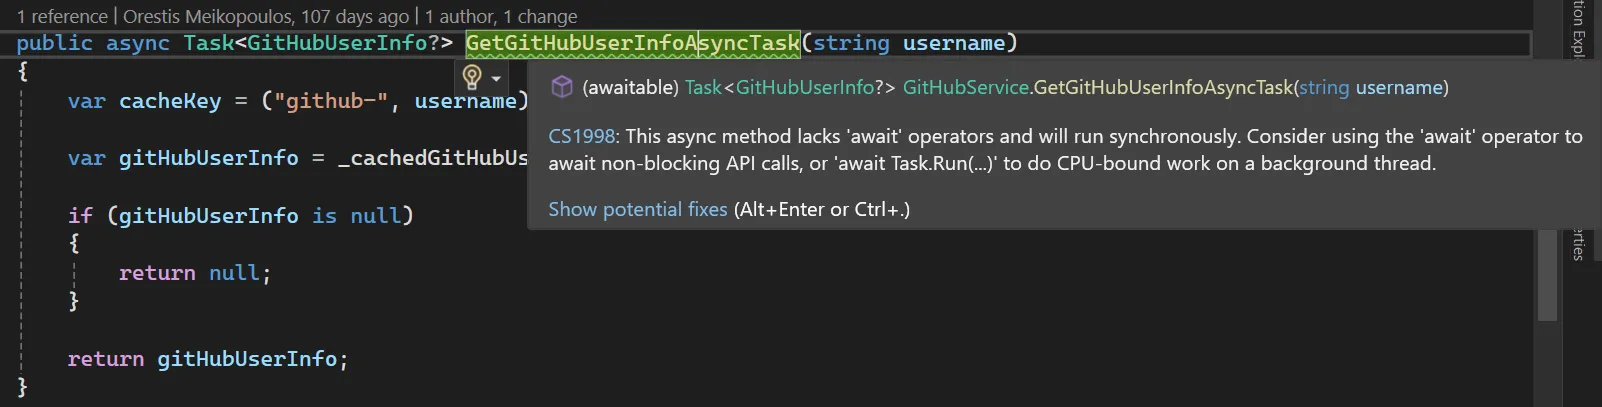 Compiler warning for async method that does not use await inside its body